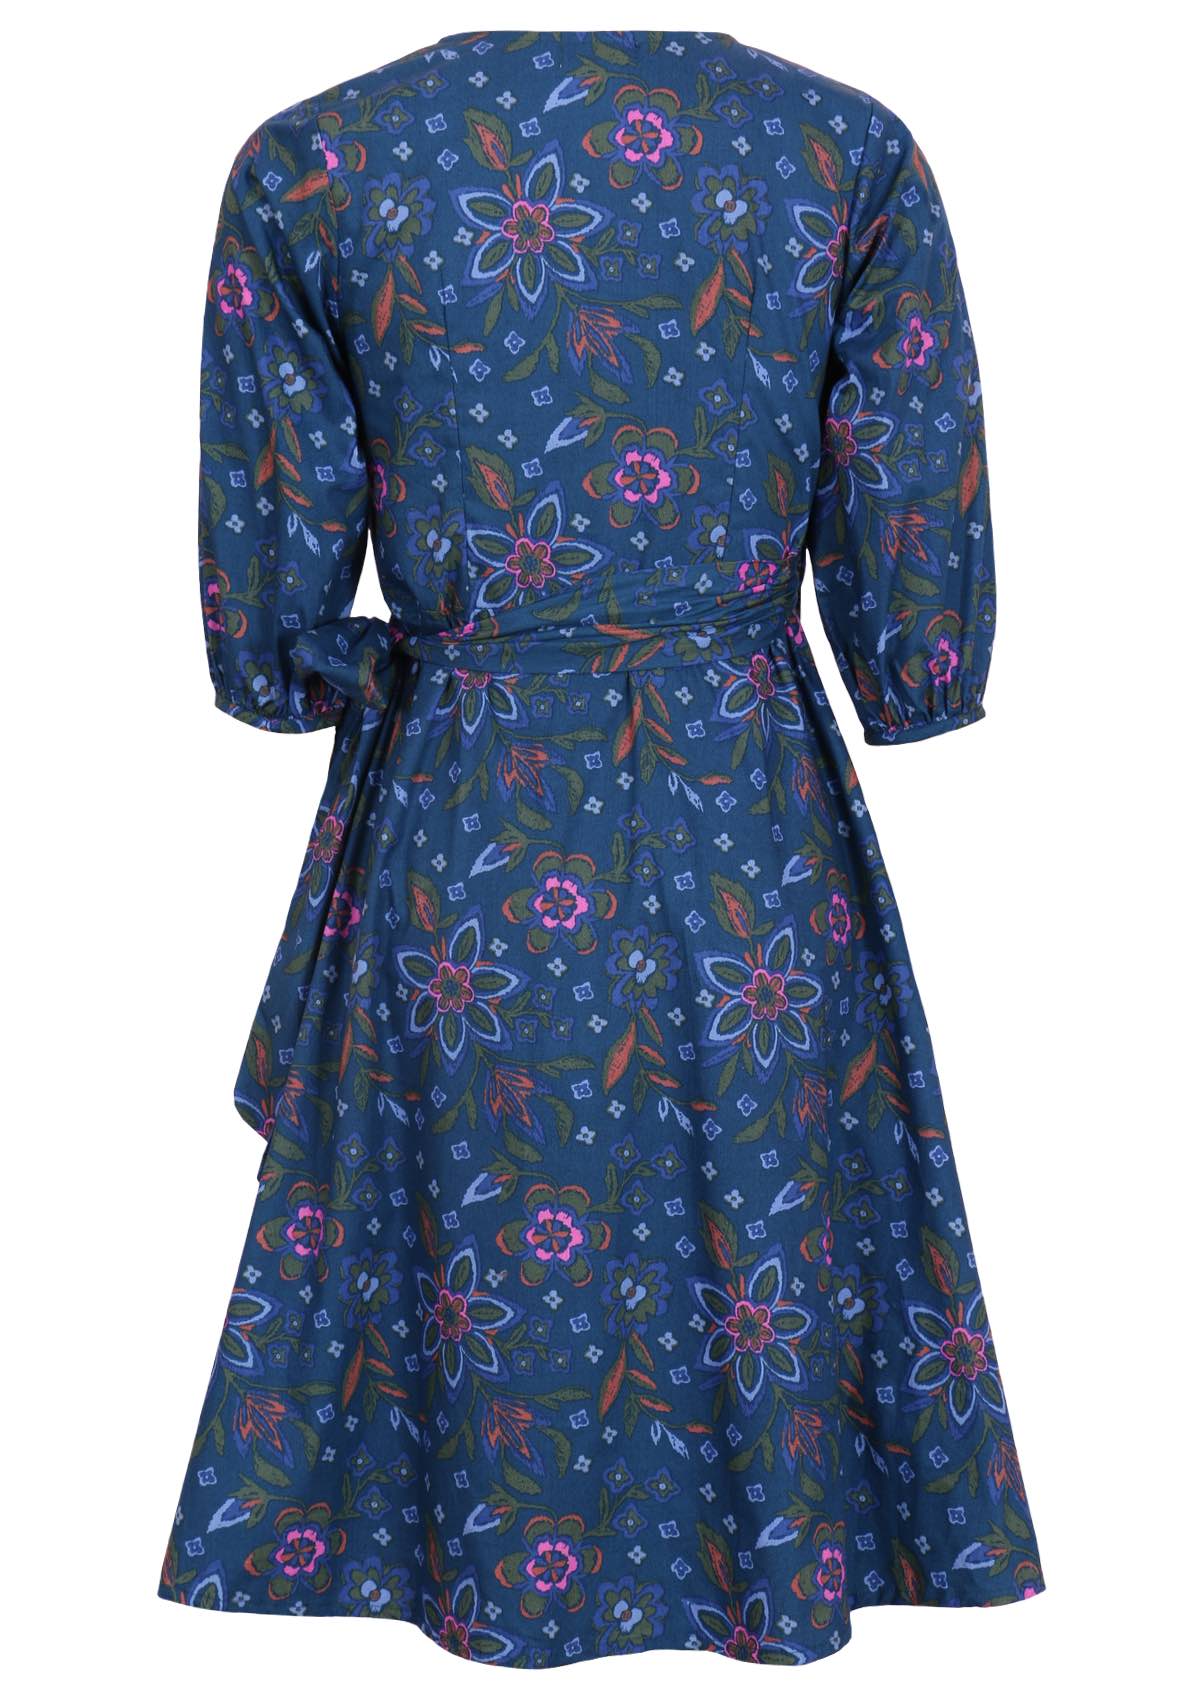 Cotton dress with florals ends below the knee and has 3/4 voluminous sleeves. 